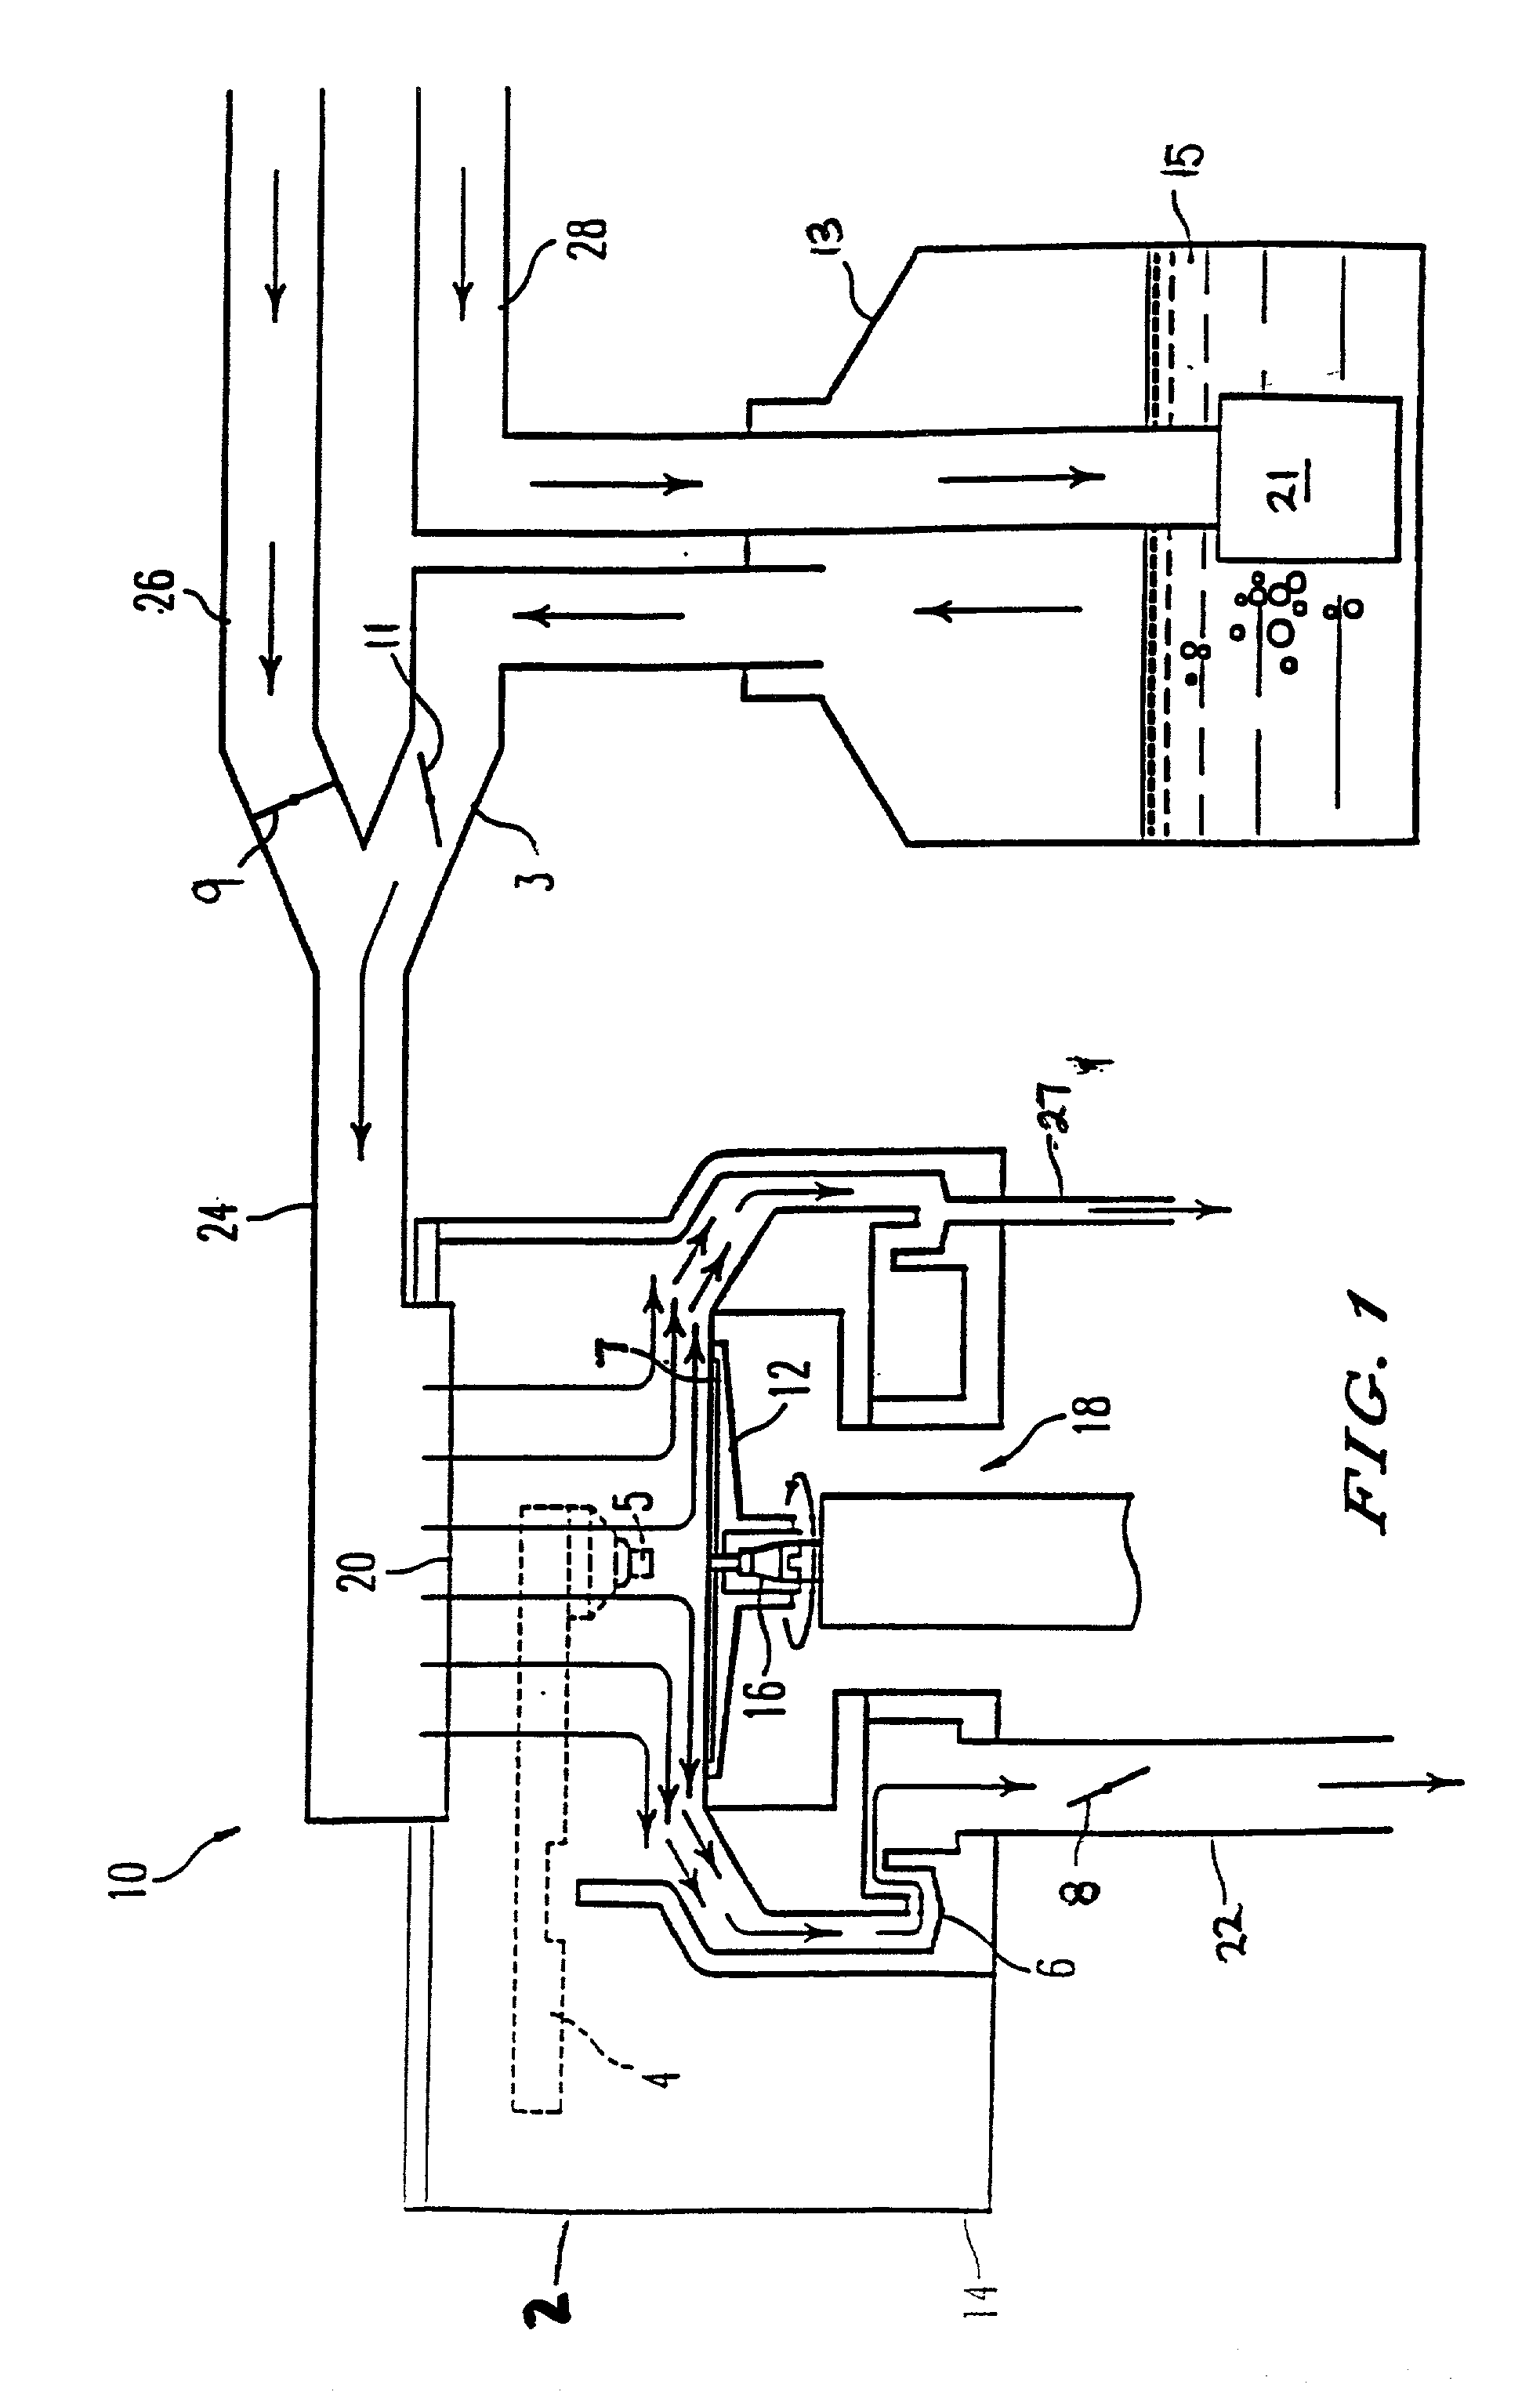 Method of uniformly coating a substrate